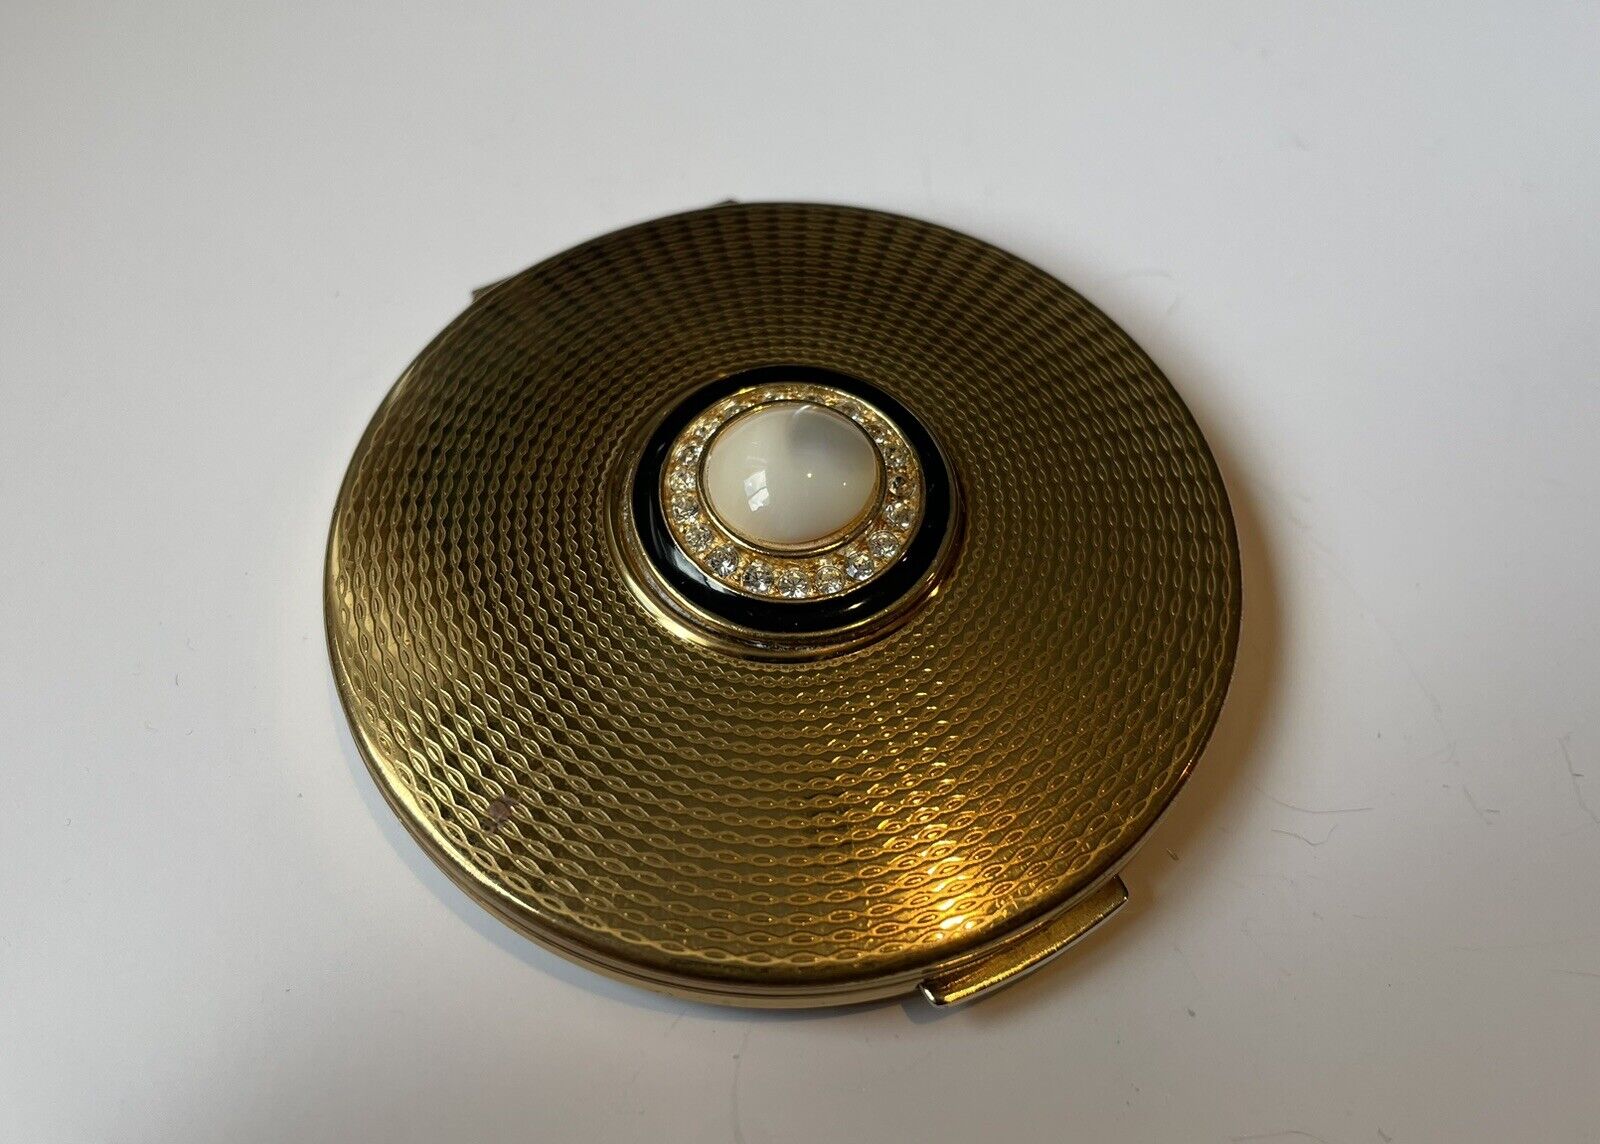 Vintage Stratton England Rhinestones And Mother of Pearl  Compact Mirror